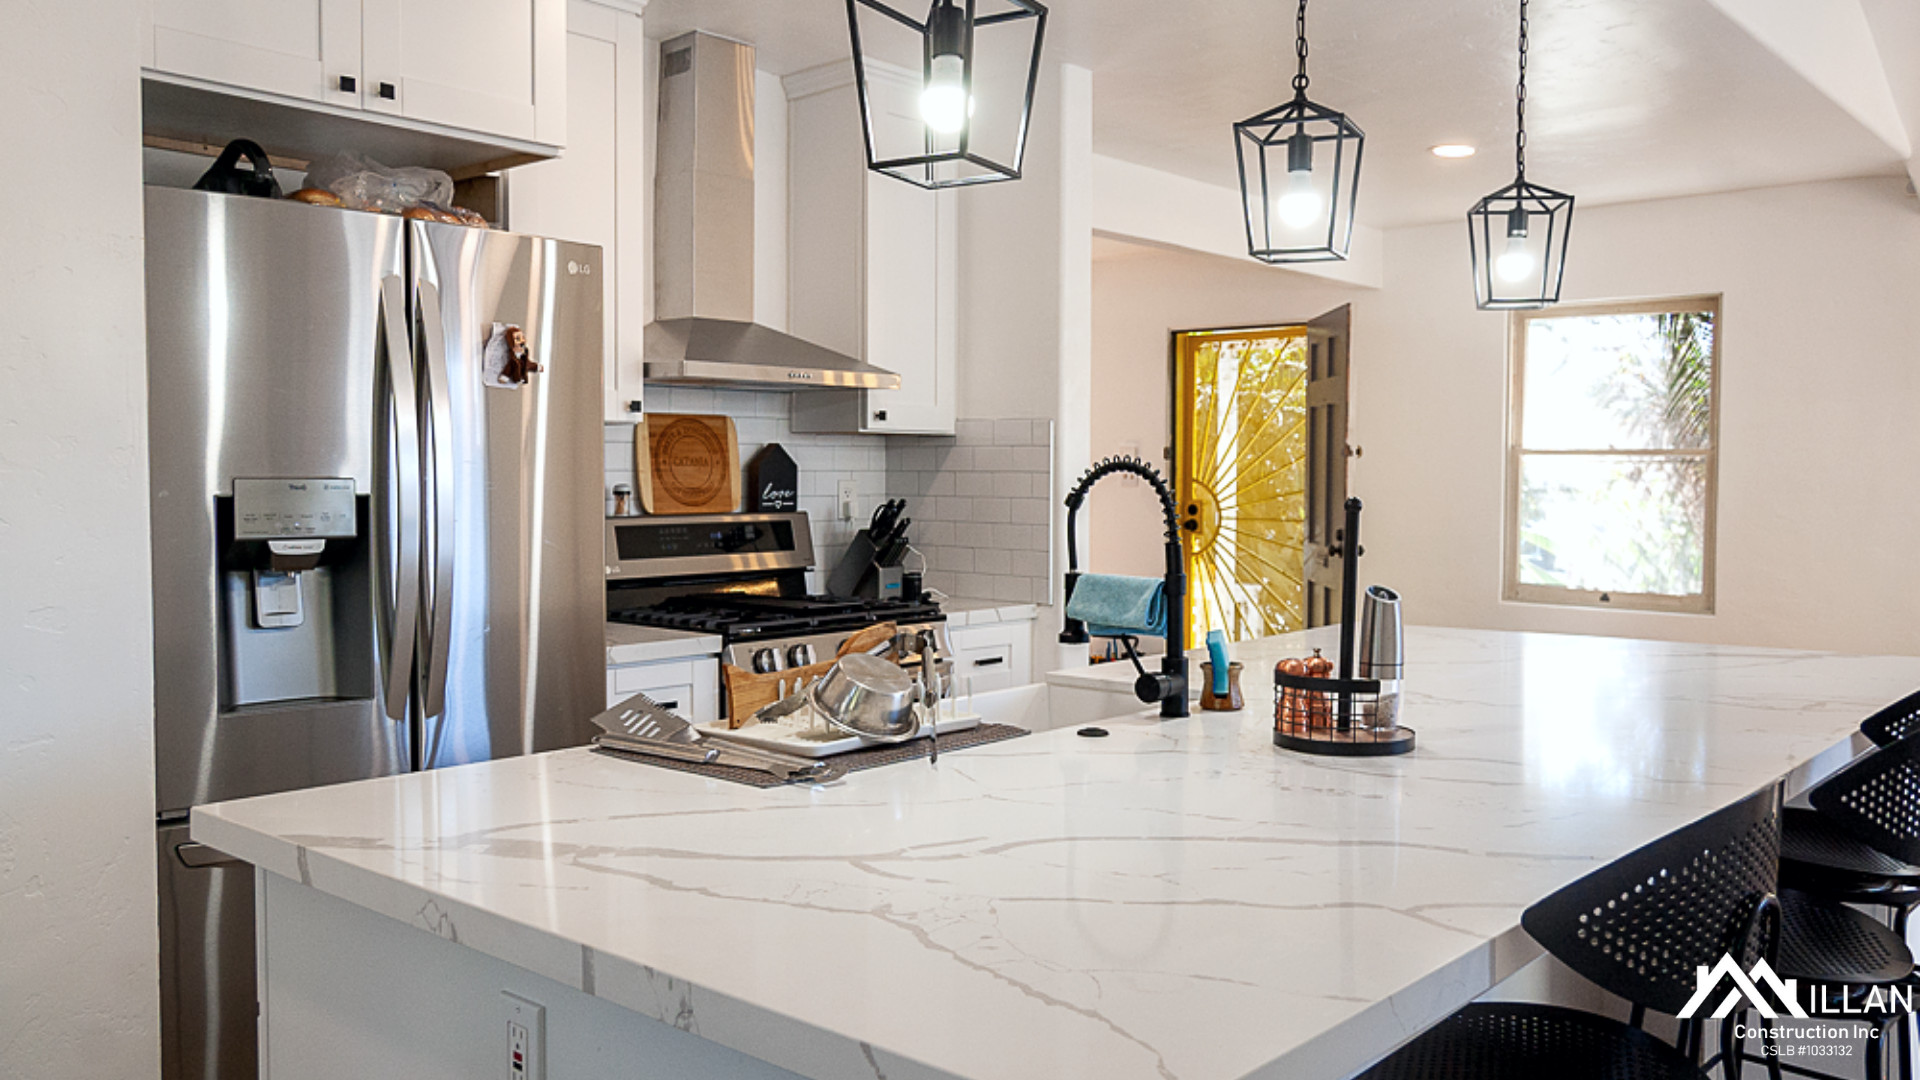 Kitchen Remodeling in Imperial Beach